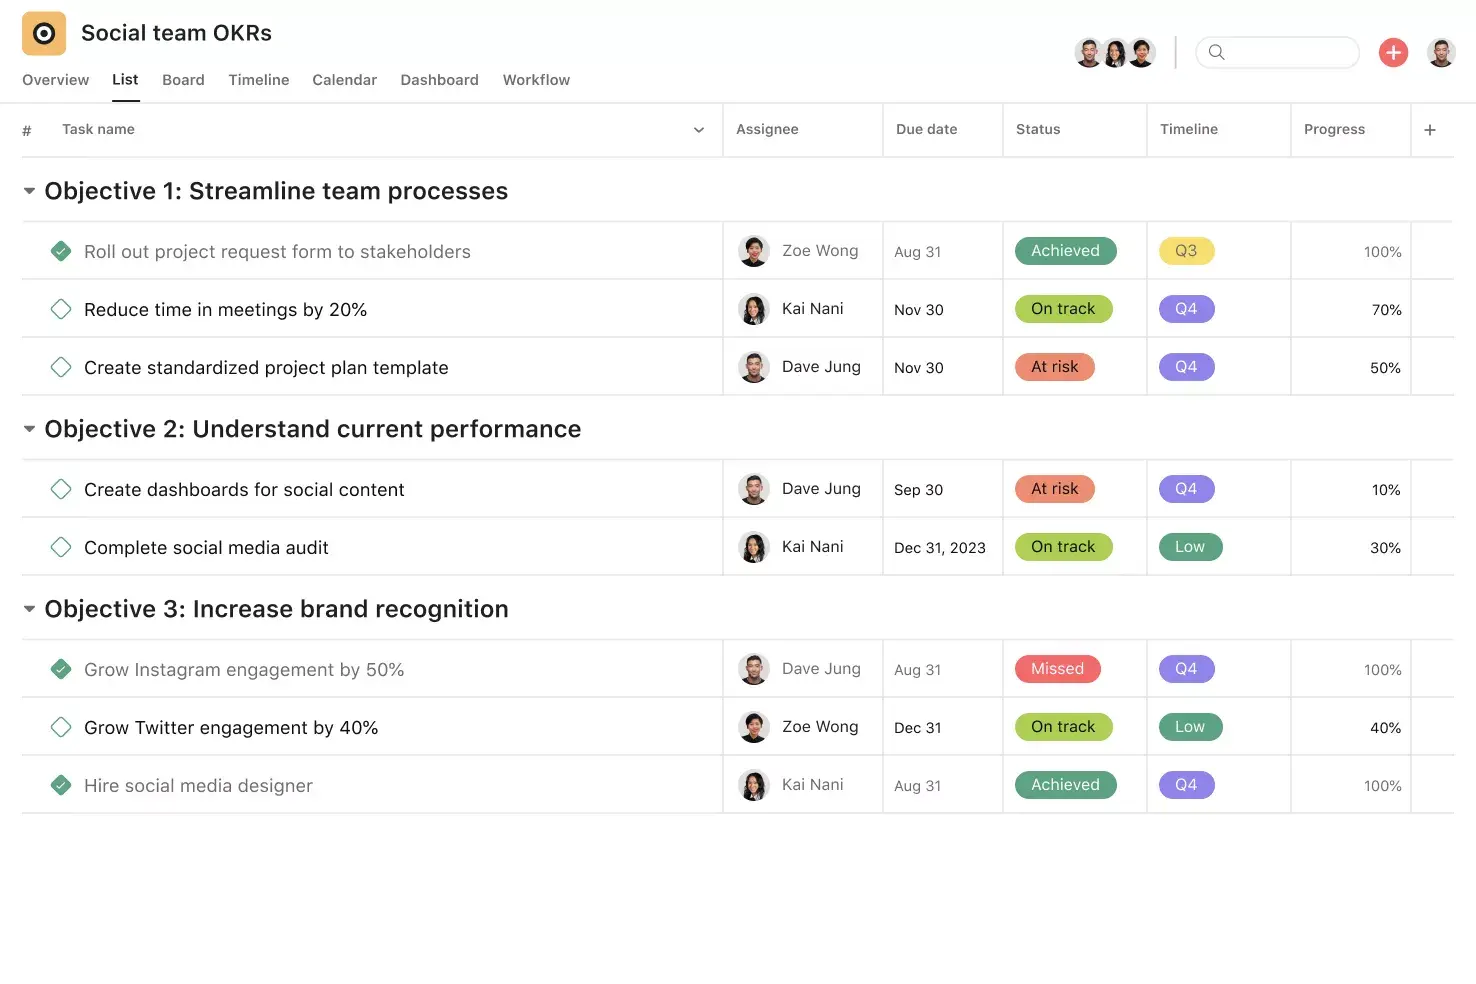 [Product ui] Team OKRs in Asana, spreadsheet-style project view (List)